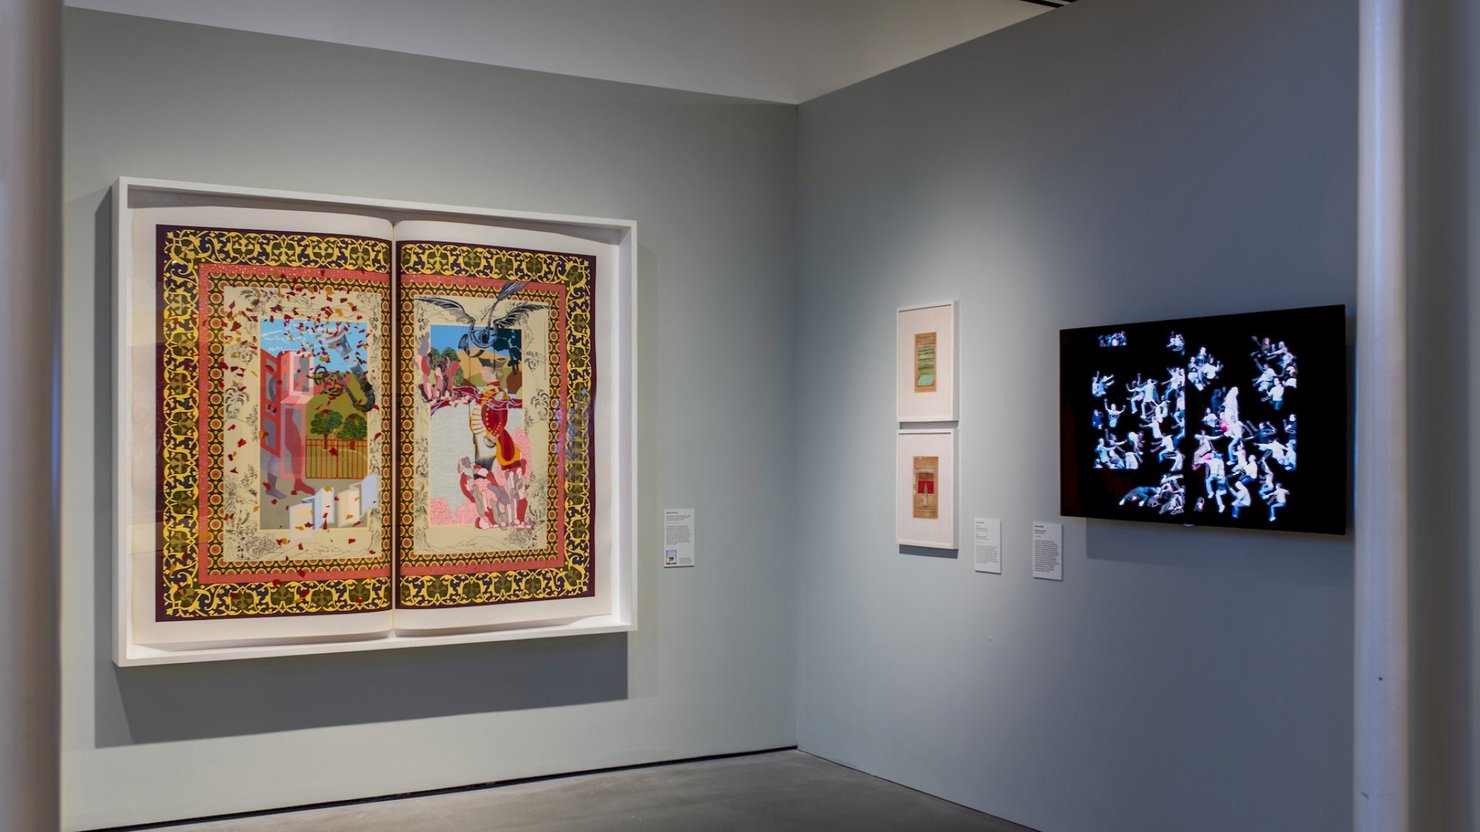 Photograph of a gallery showing a large artwork appearing like an open book with other smaller artworks on display.